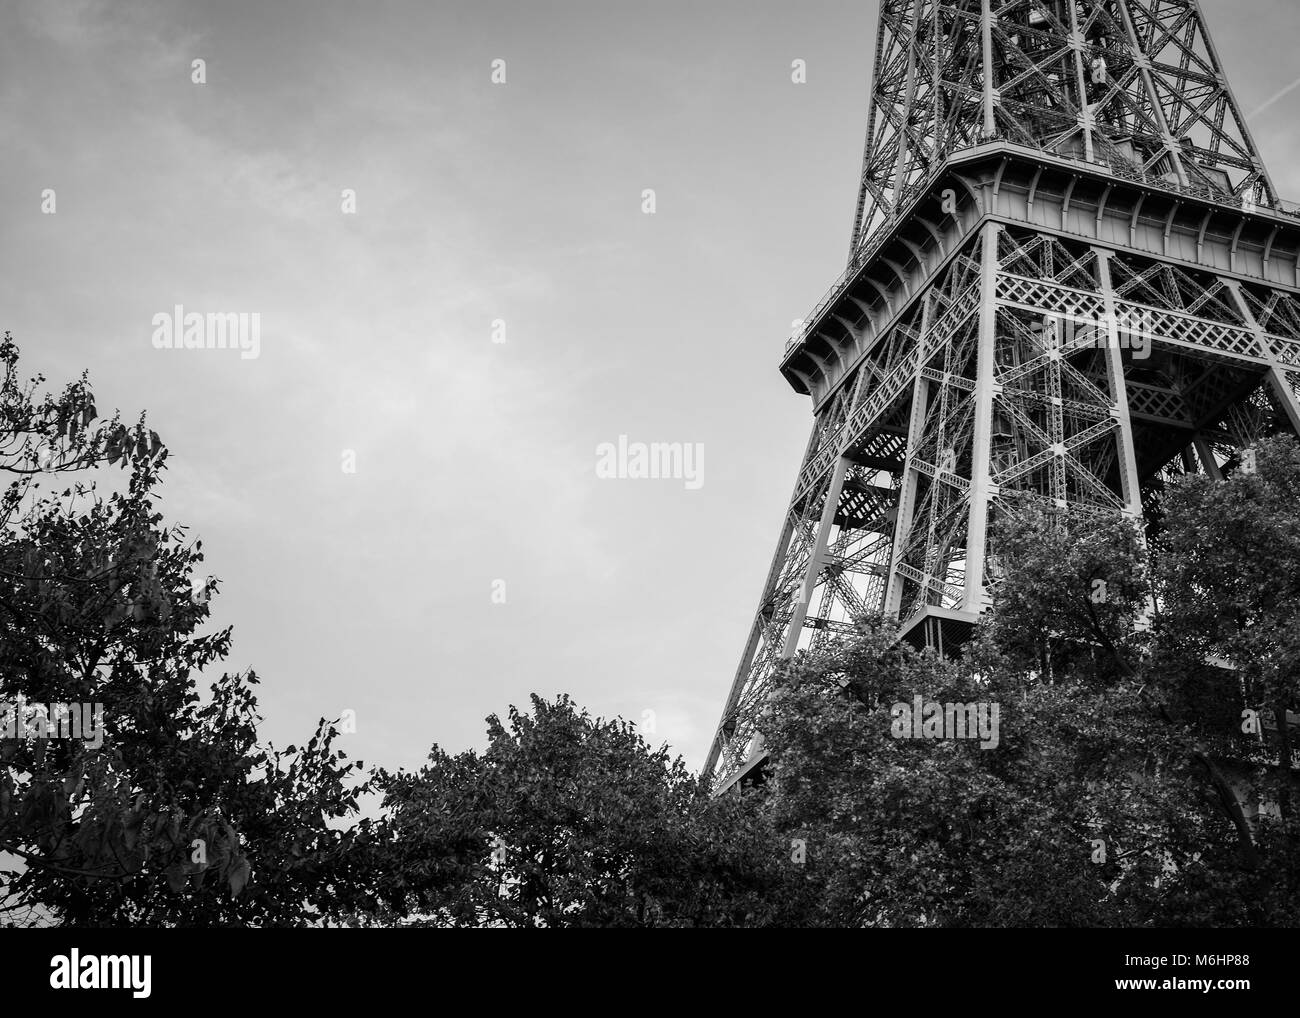 Black and White image of The Eiffel Tower, Paris, France Stock Photo